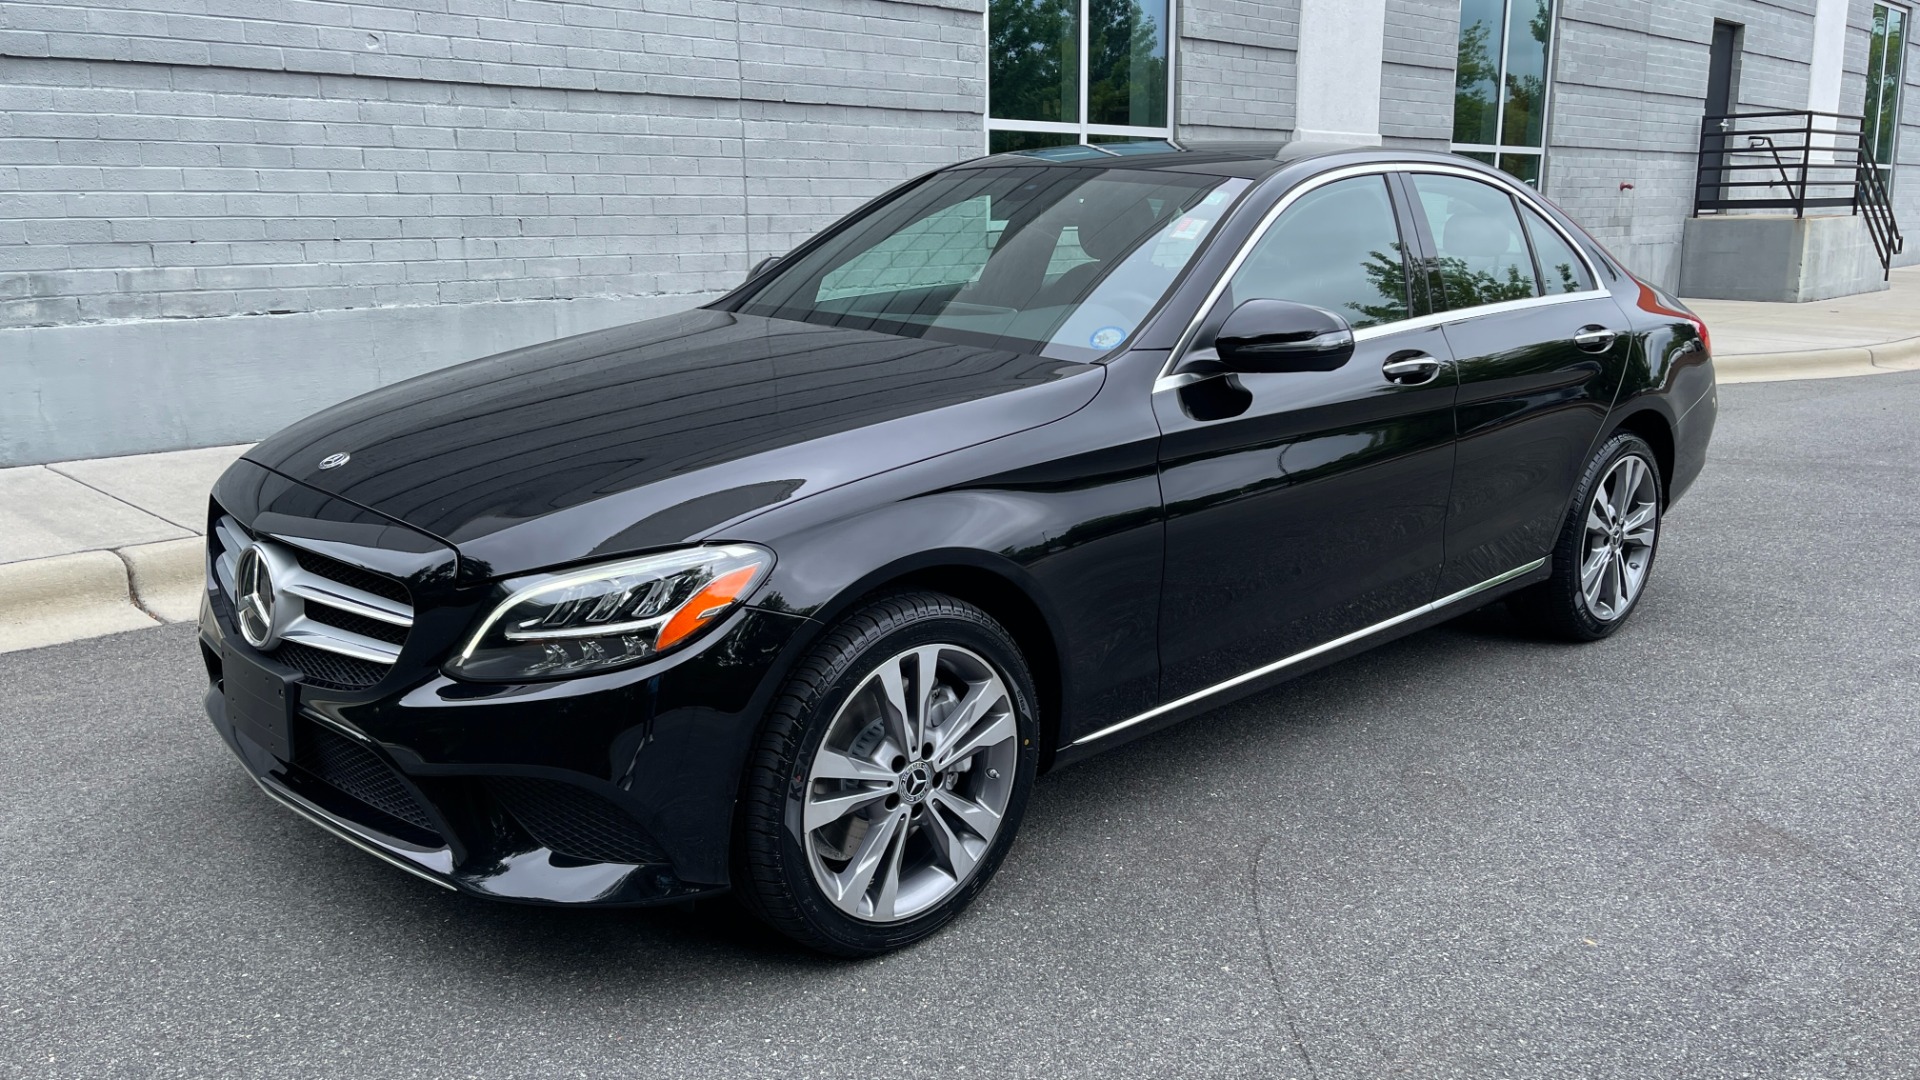 Used 2019 Mercedes-Benz C-Class C 300 / 4MATIC / BURMESTER SOUND / PANORAMIC ROOF / PREMIUM / MULTIMEDIA for sale Sold at Formula Imports in Charlotte NC 28227 7